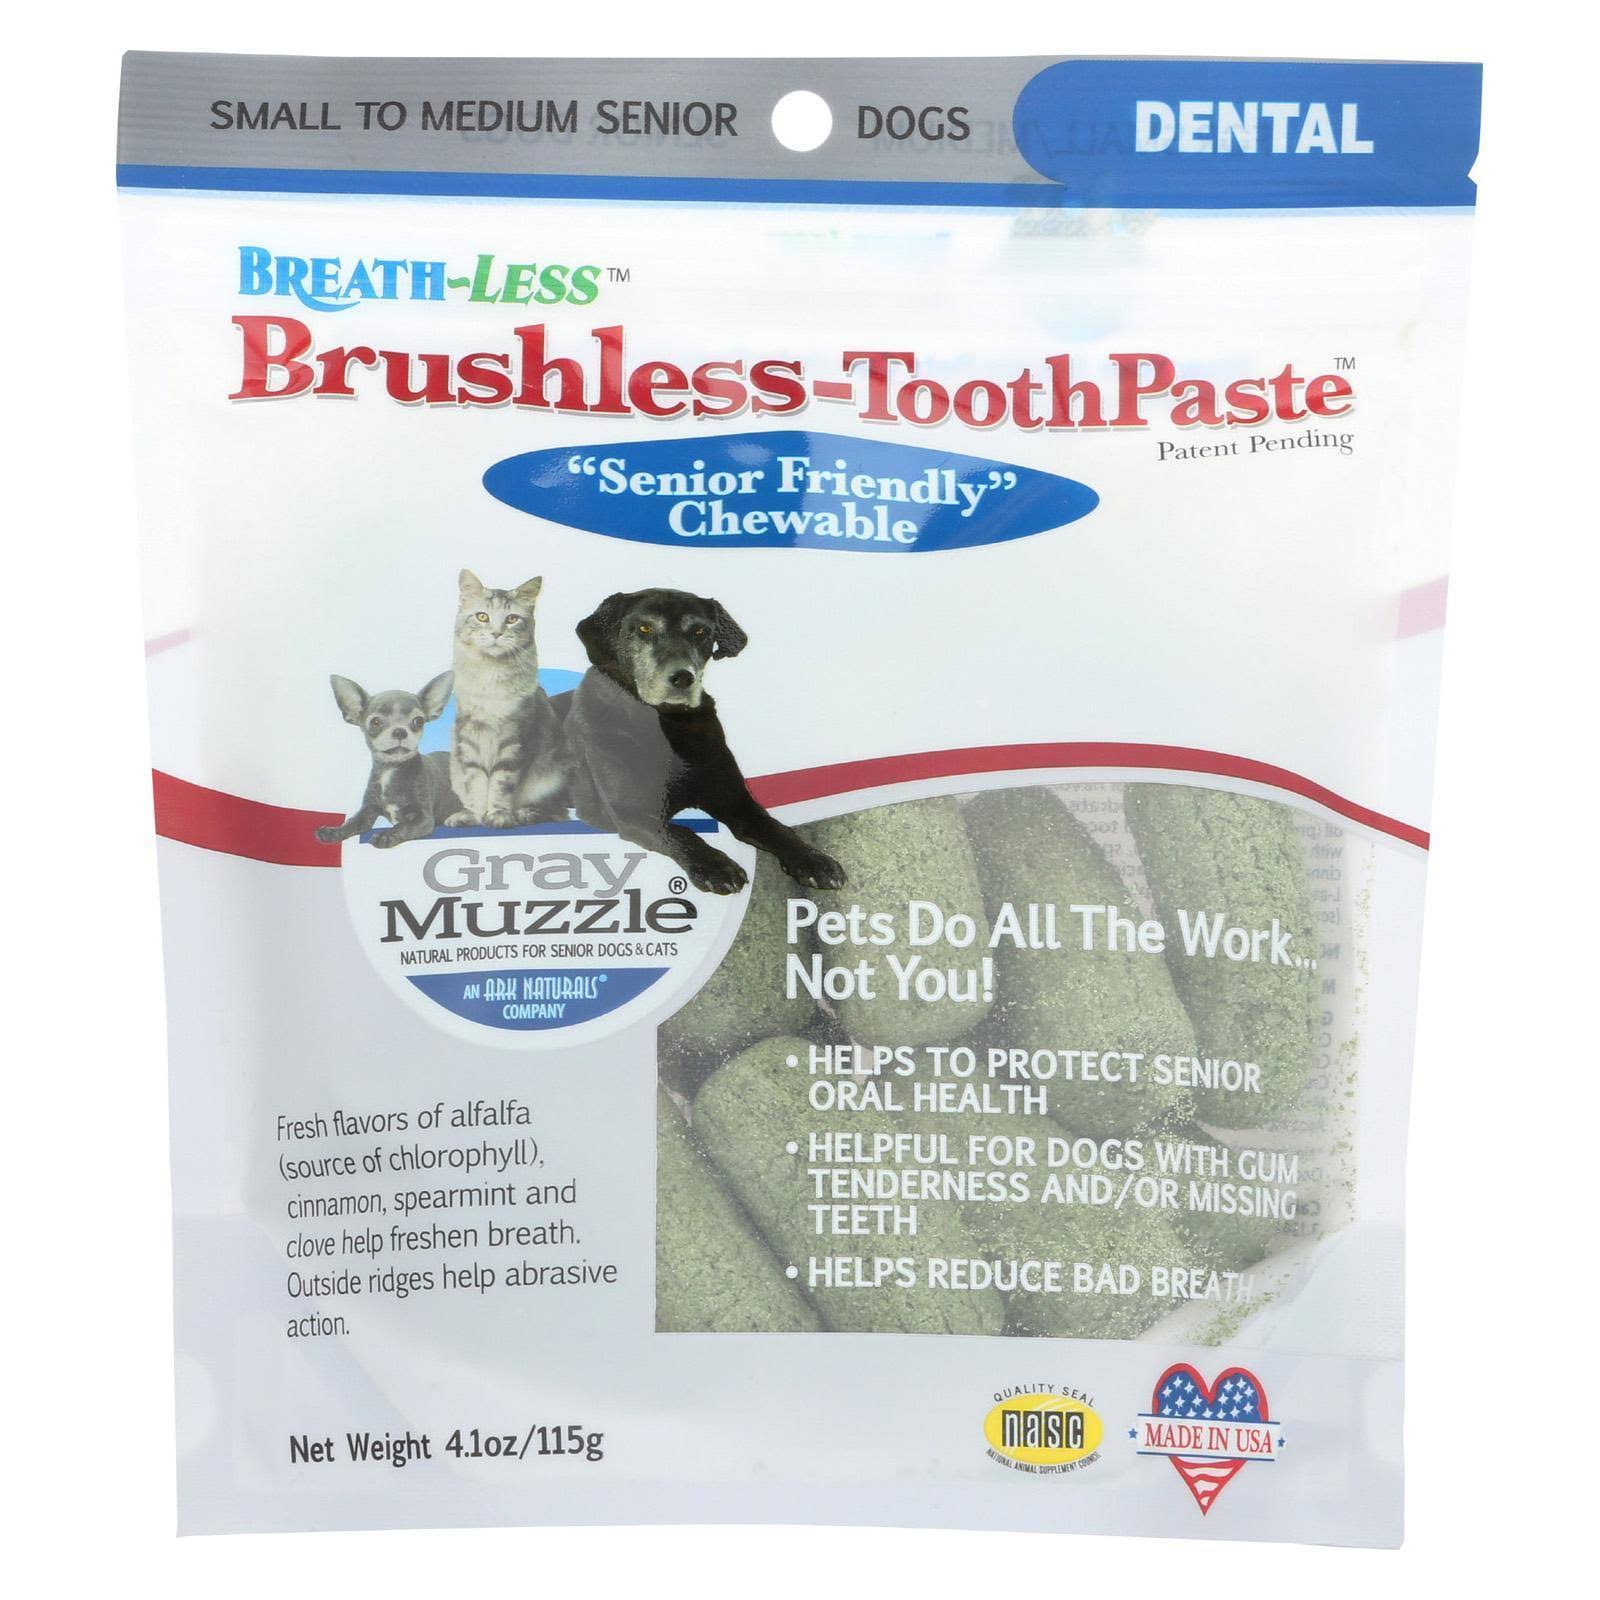 Ark Naturals Brushless Tooth Paste Chewable Dental Treats for Dogs - Gray Muzzle, 4.1oz